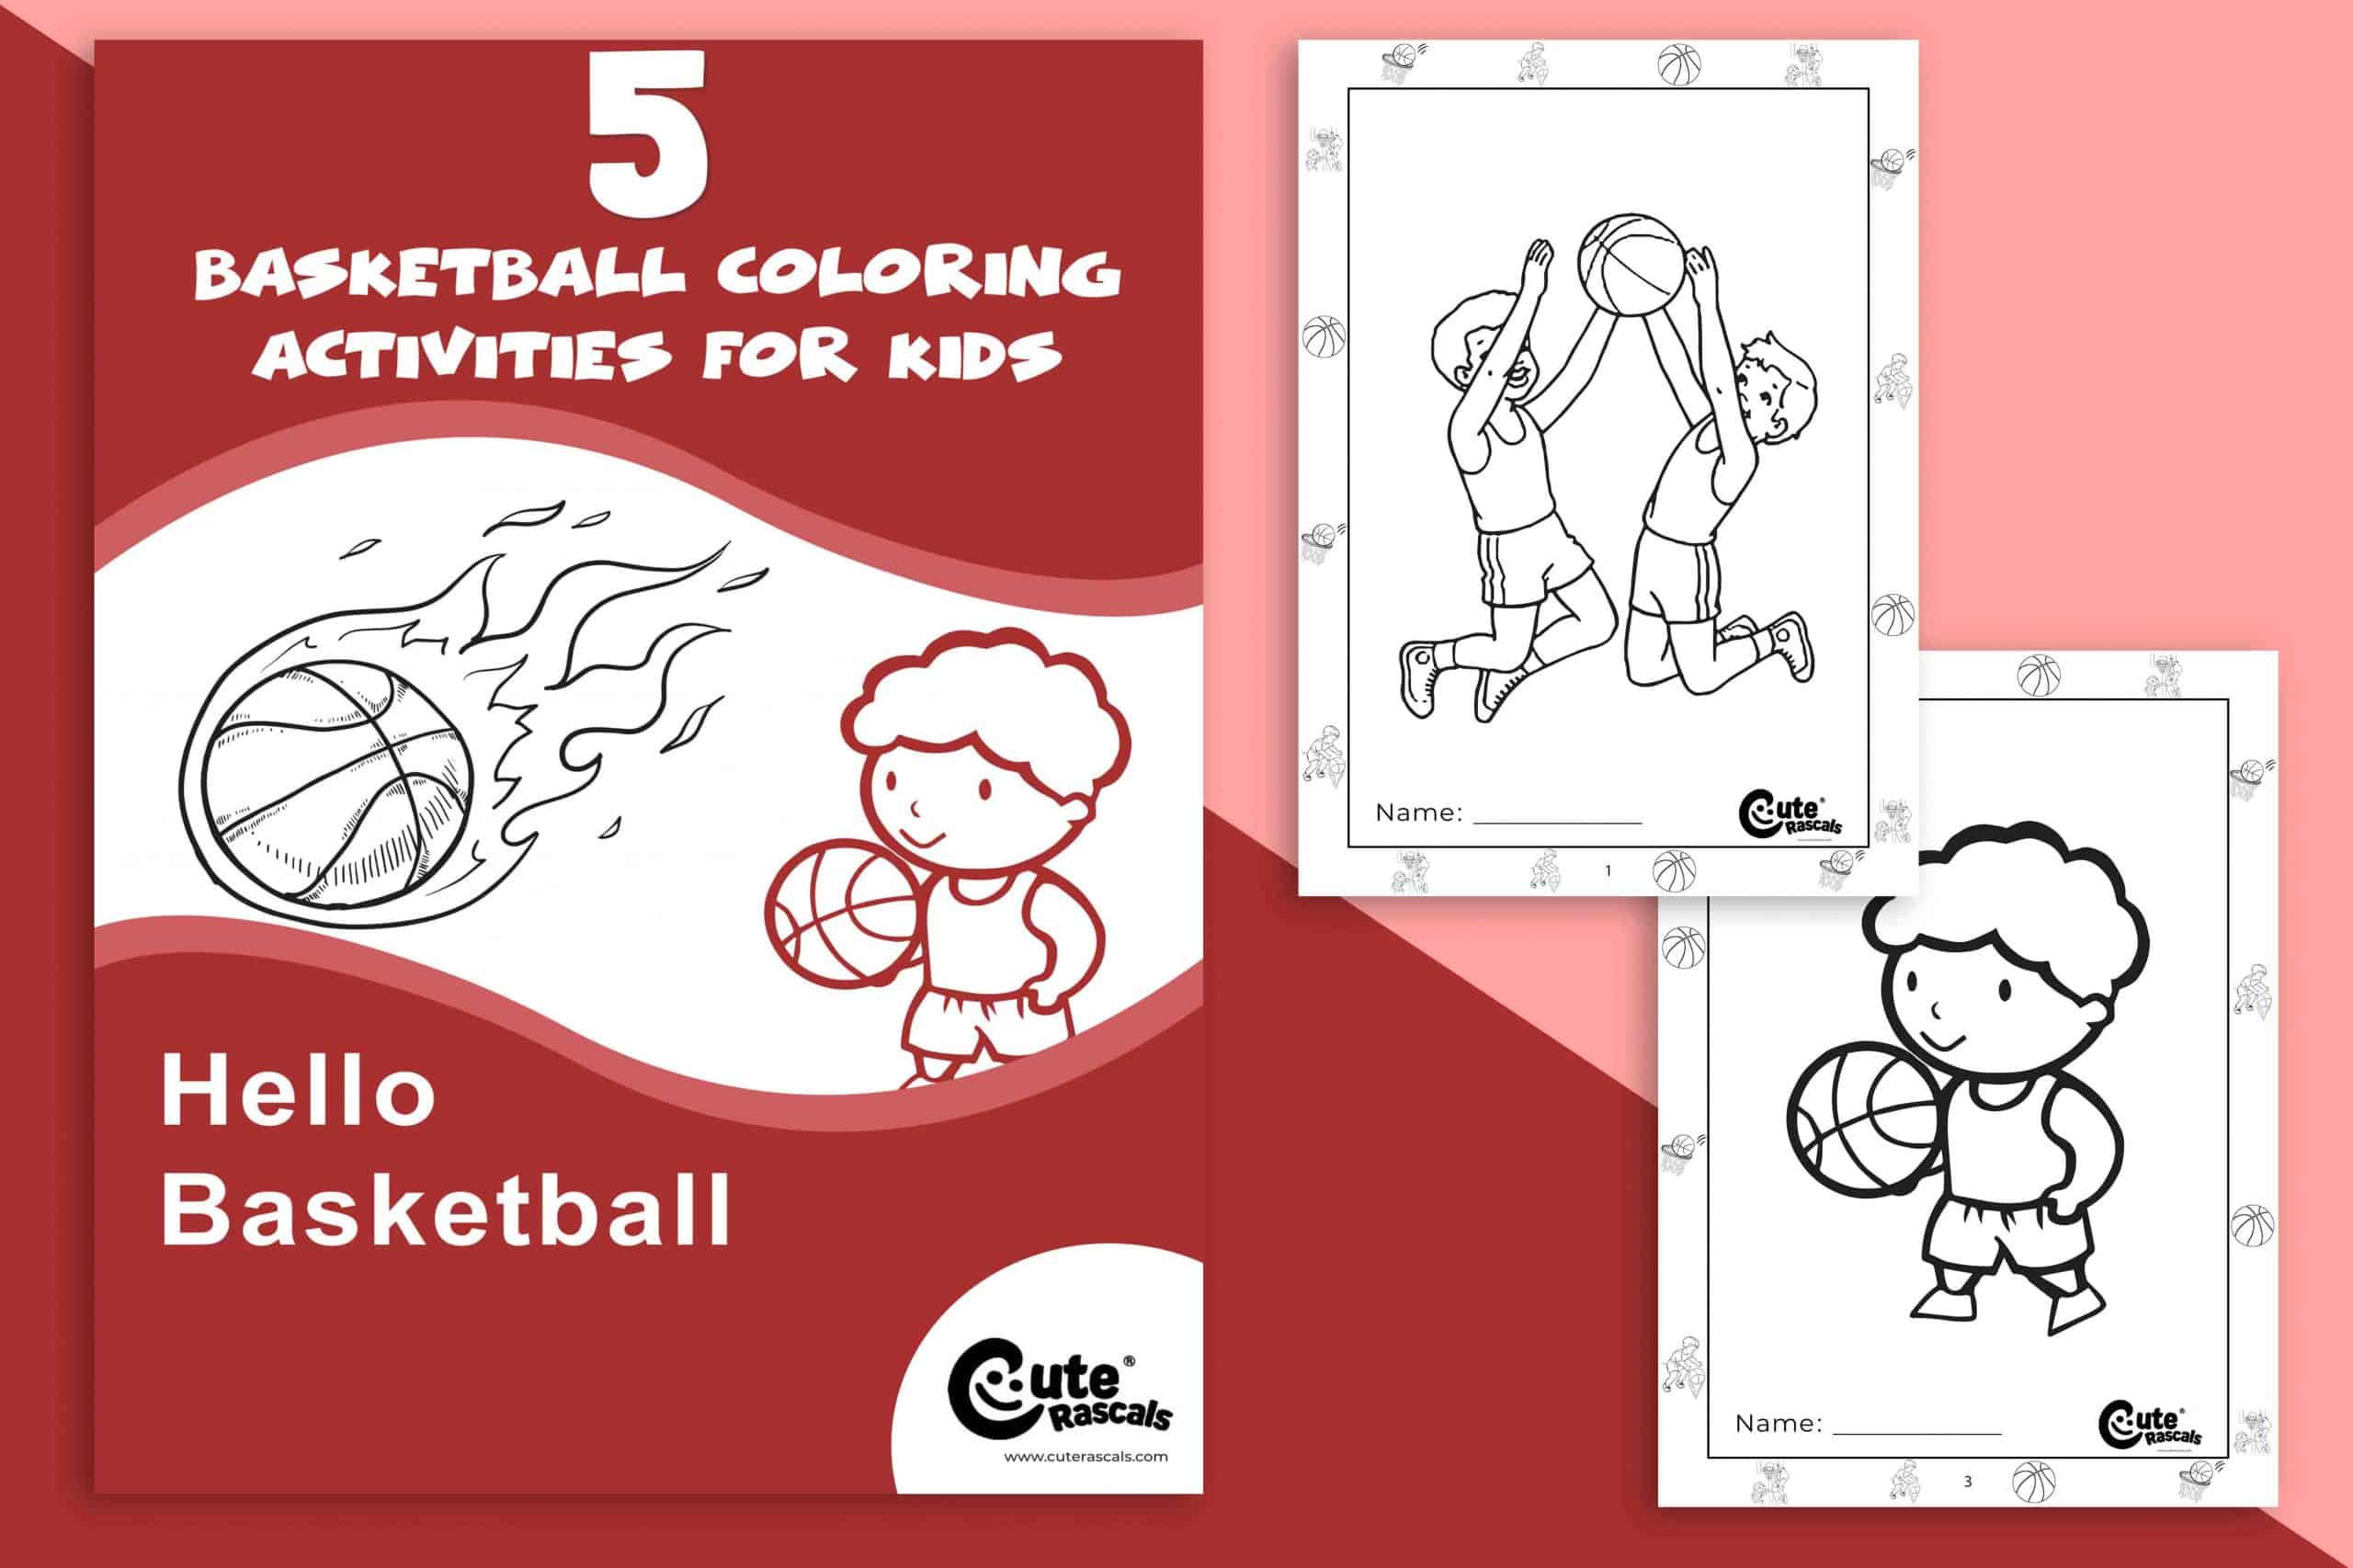 5 Cool & Simple Basketball Coloring Pages for Everyone